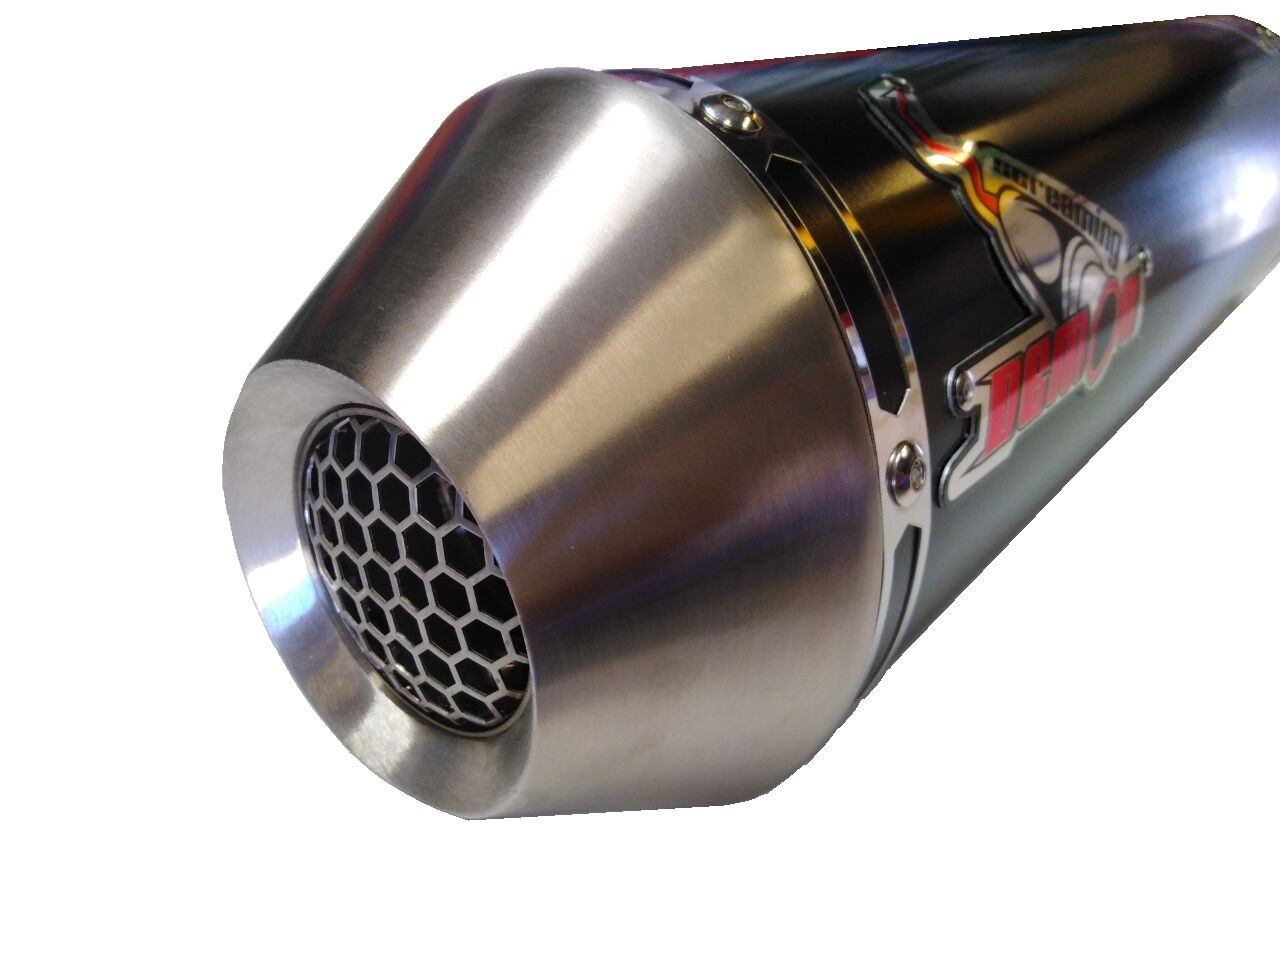 This exhaust also includes a GP style exit insert which can be fitted when low volume inserts are not fitted.